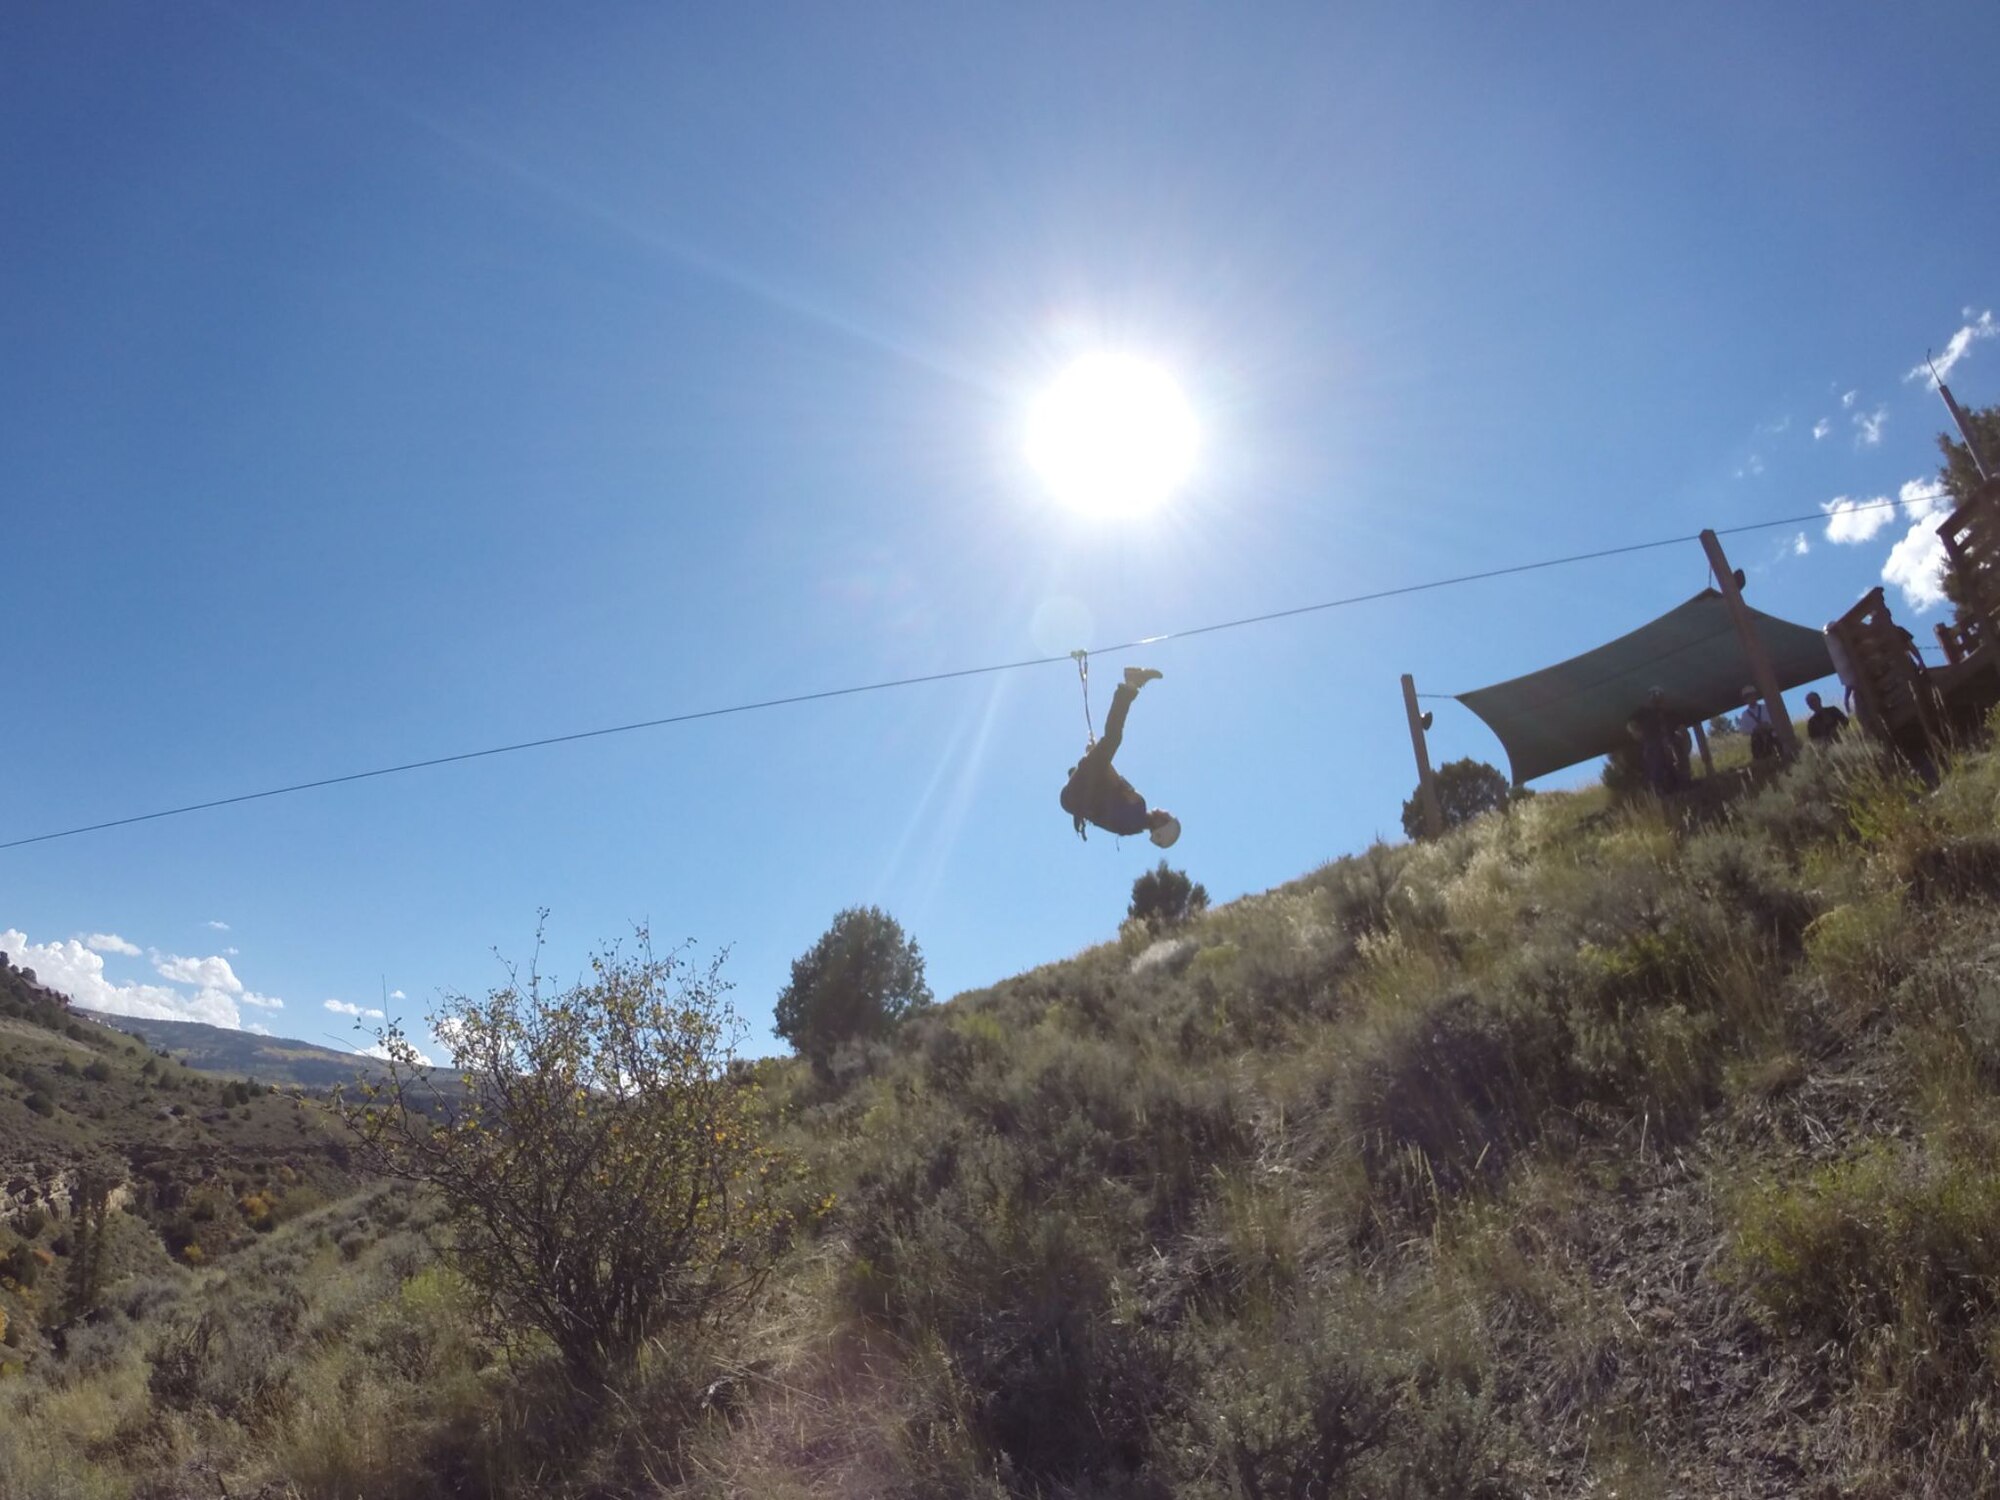 The Buckley Air Force Base Outdoor Recreation program hosted its first zip line tour for Airmen and their families at Vail’s Zip Adventure in Colorado, Sept. 20. (U.S. Air Force photo/